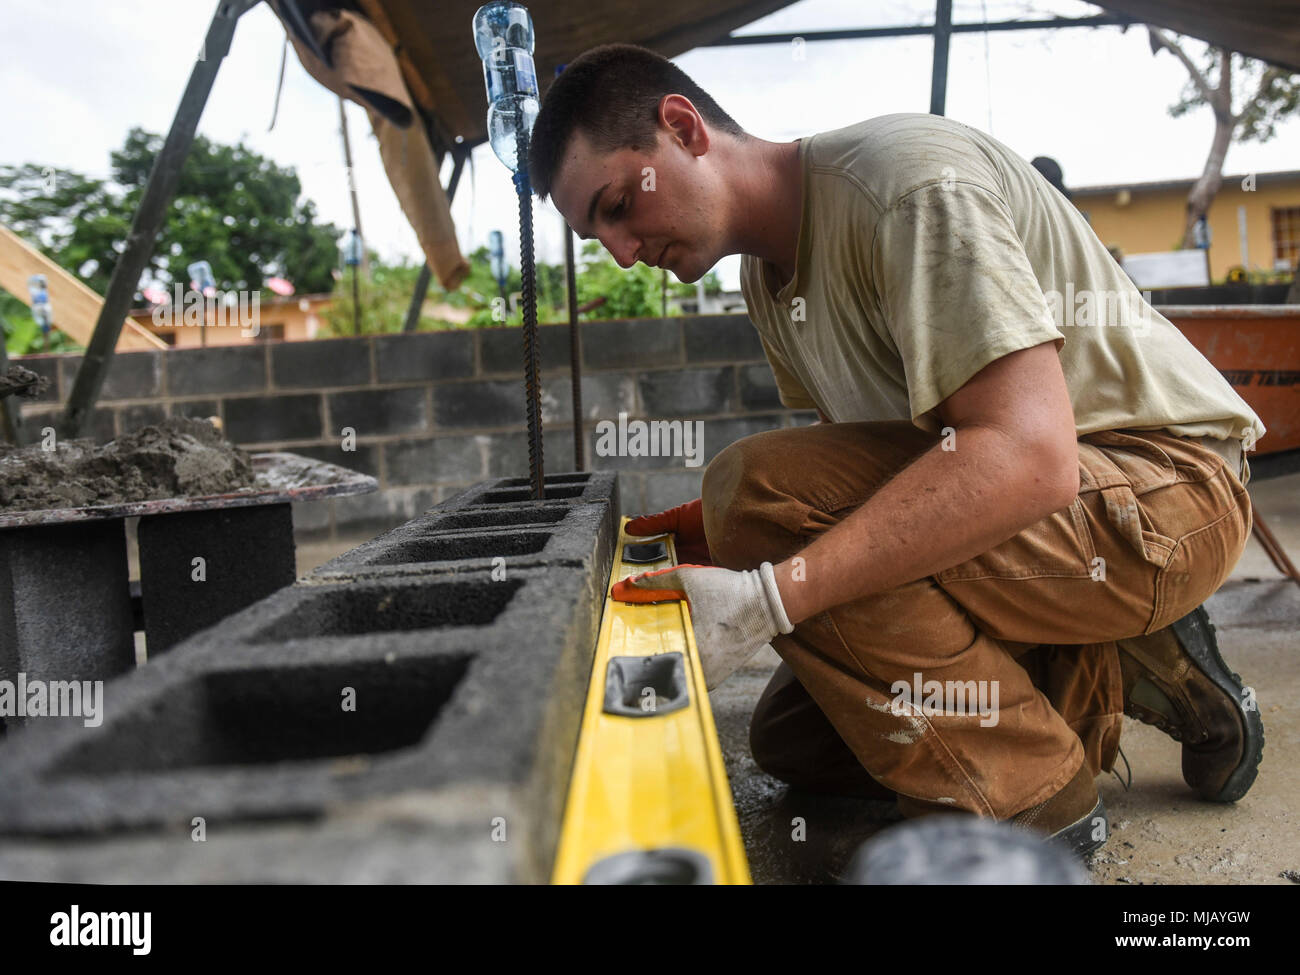 U.S Air Force Senior Airman Andrew Nameth, 346th Air Expeditionary Group Rapid Engineer Deployable Heavy Operational Repair Squadron Engineer member who is deployed from Nellis Air Force Base, Nev., ensures a wall is level April 27, 2018 at a construction site in Meteti, Panama. Nameth is participating in Exercise New Horizons 2018, which will assist communities throughout Panama by providing medical assistance and building facilities such as schools, a youth community center and a women’s health ward. (U.S. Air Force photo by Senior Airman Dustin Mullen/Released) Stock Photo